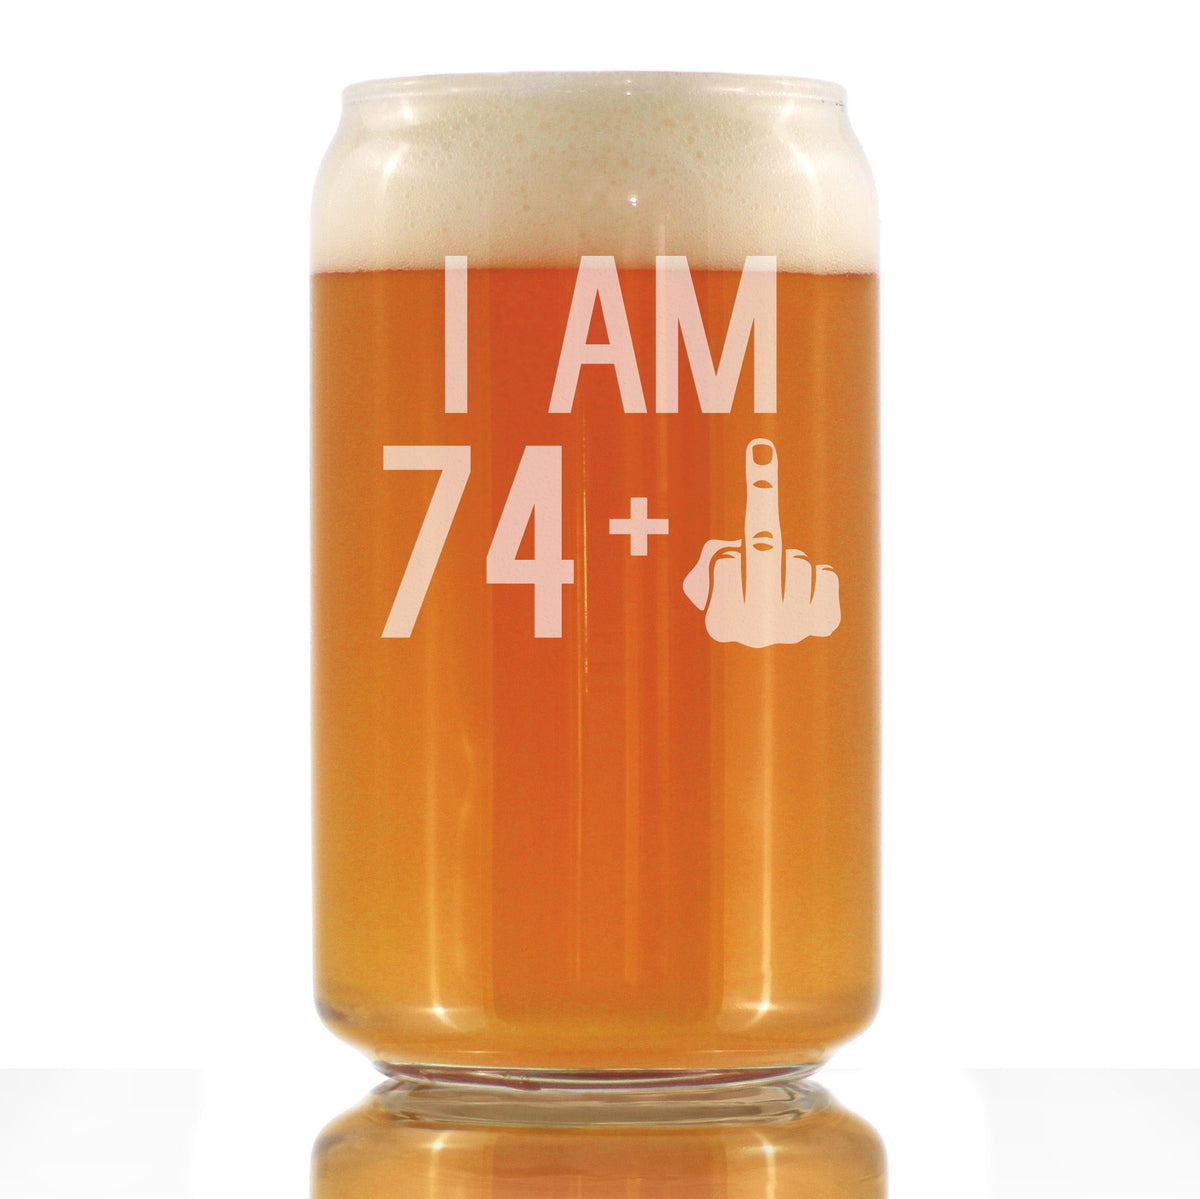 74 + 1 Middle Finger - 16 Ounce Beer Can Pint Glass